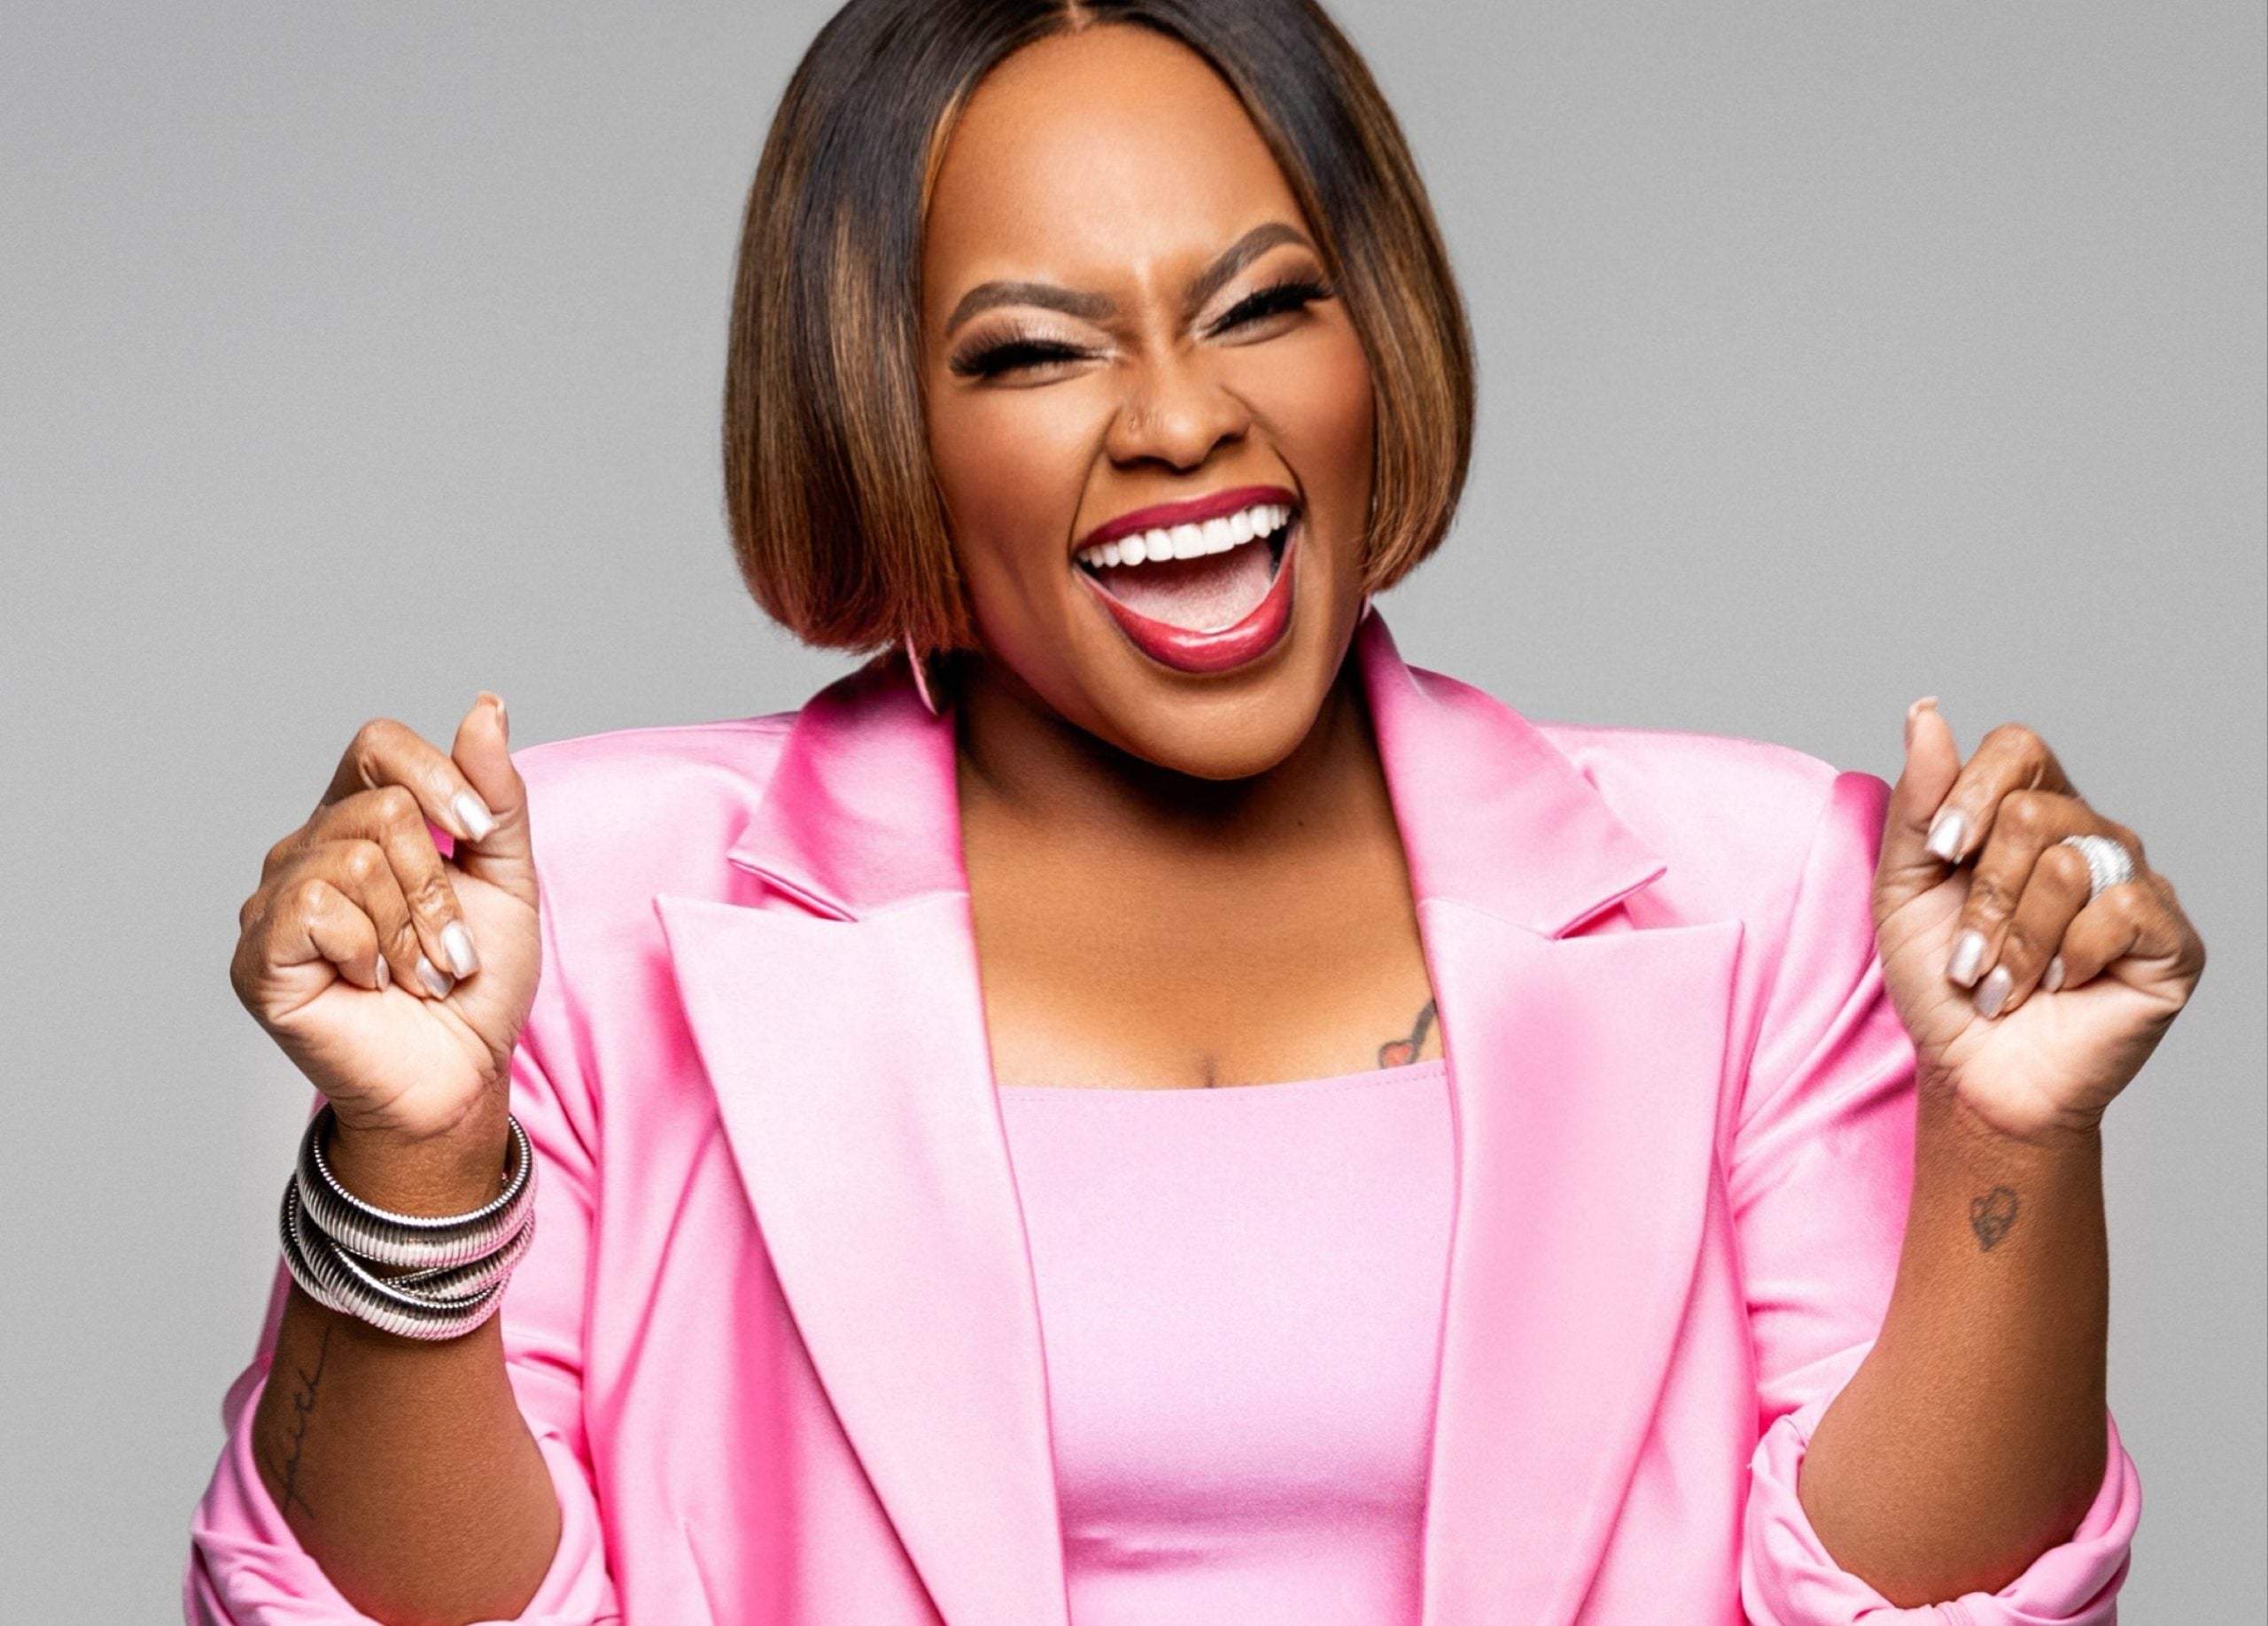 Mamas At Work: Tasha Cobbs Leonard On Juggling Kids Ages 2 To 21 And Writing Her First Book